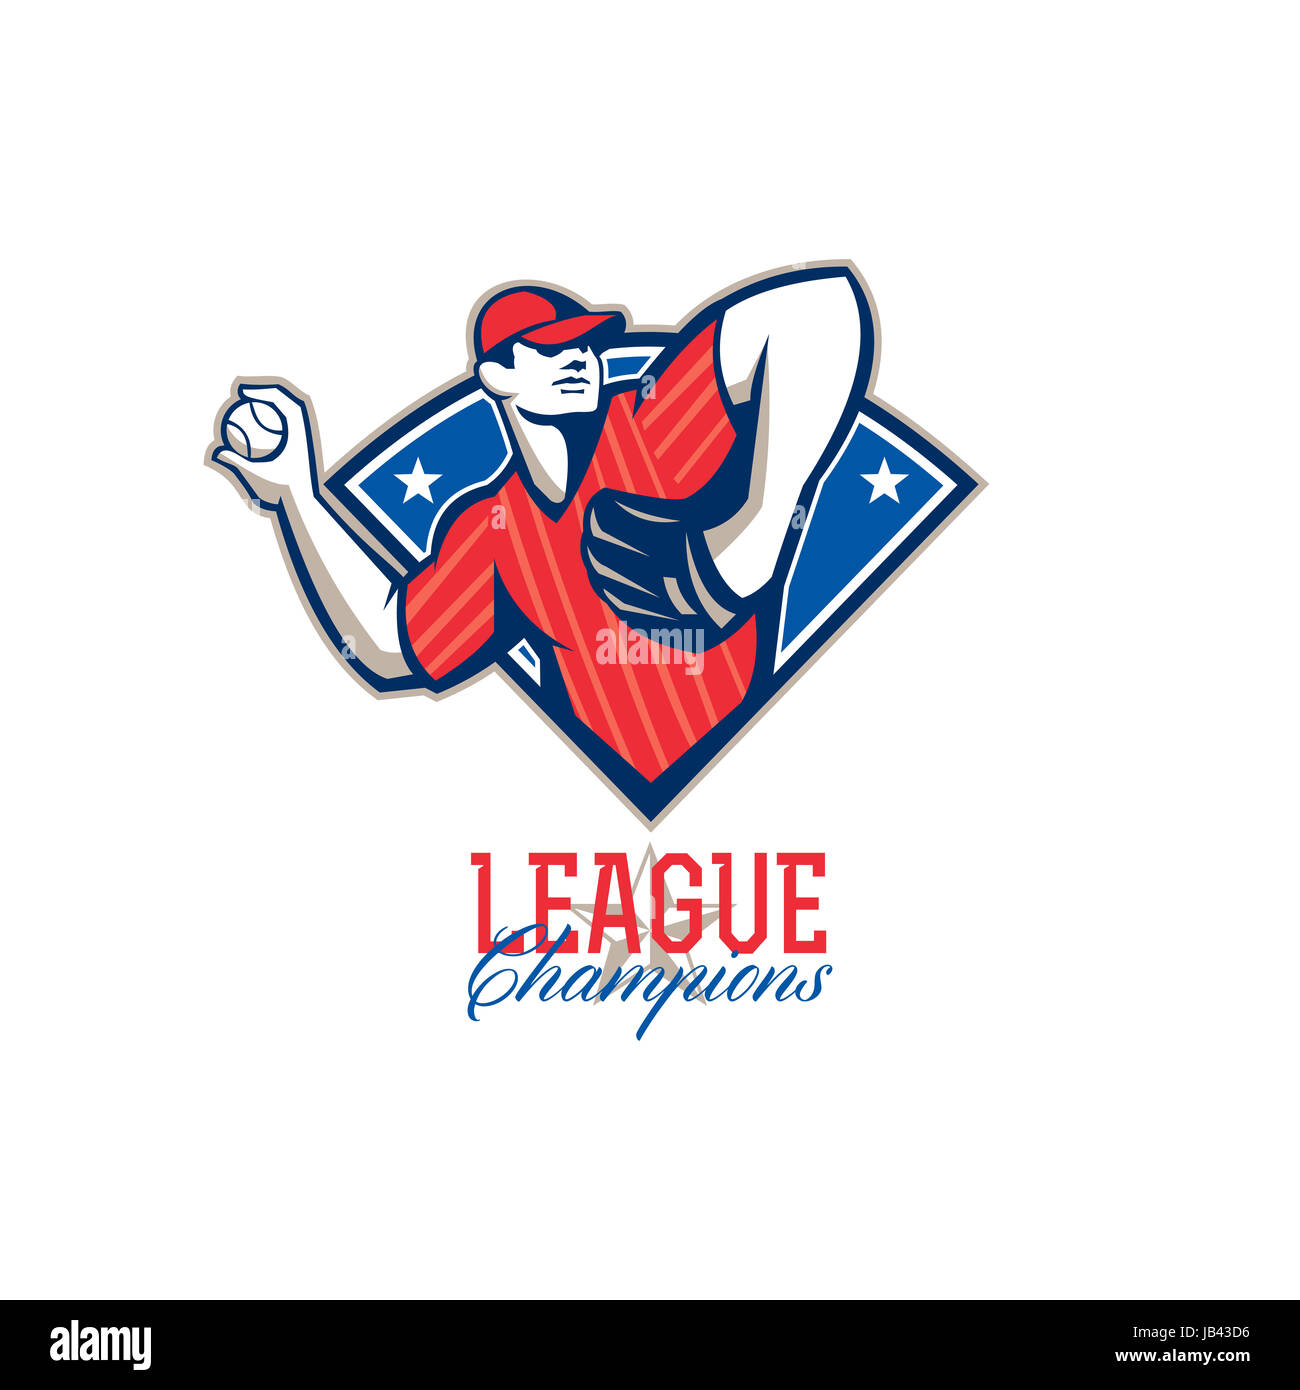 Illustration of a american baseball player pitcher outfielder throwing ball with words League Champions. Stock Photo